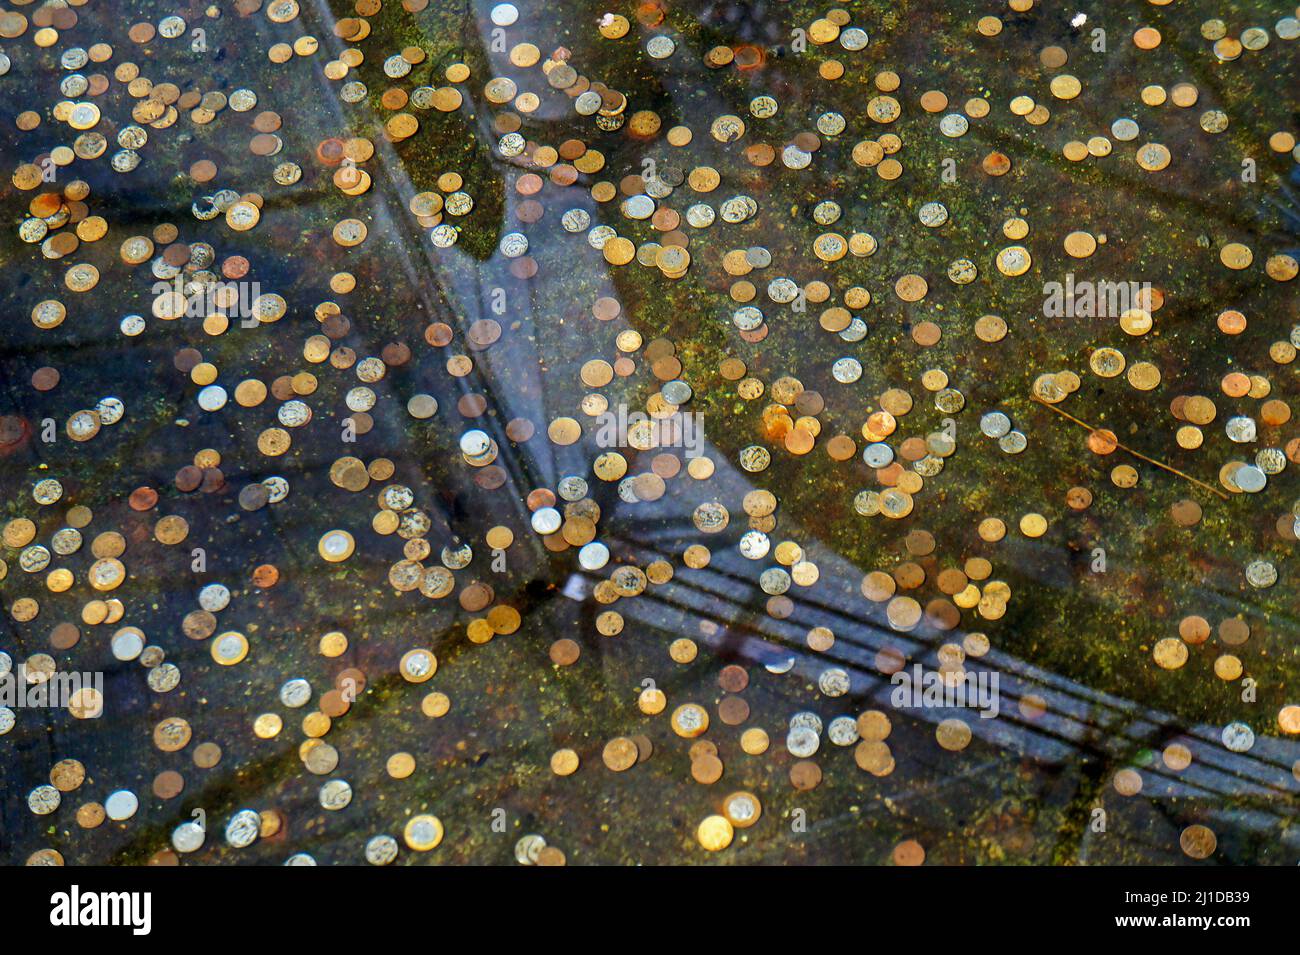 Coins in the wishing well, Rio, Brazil Stock Photo